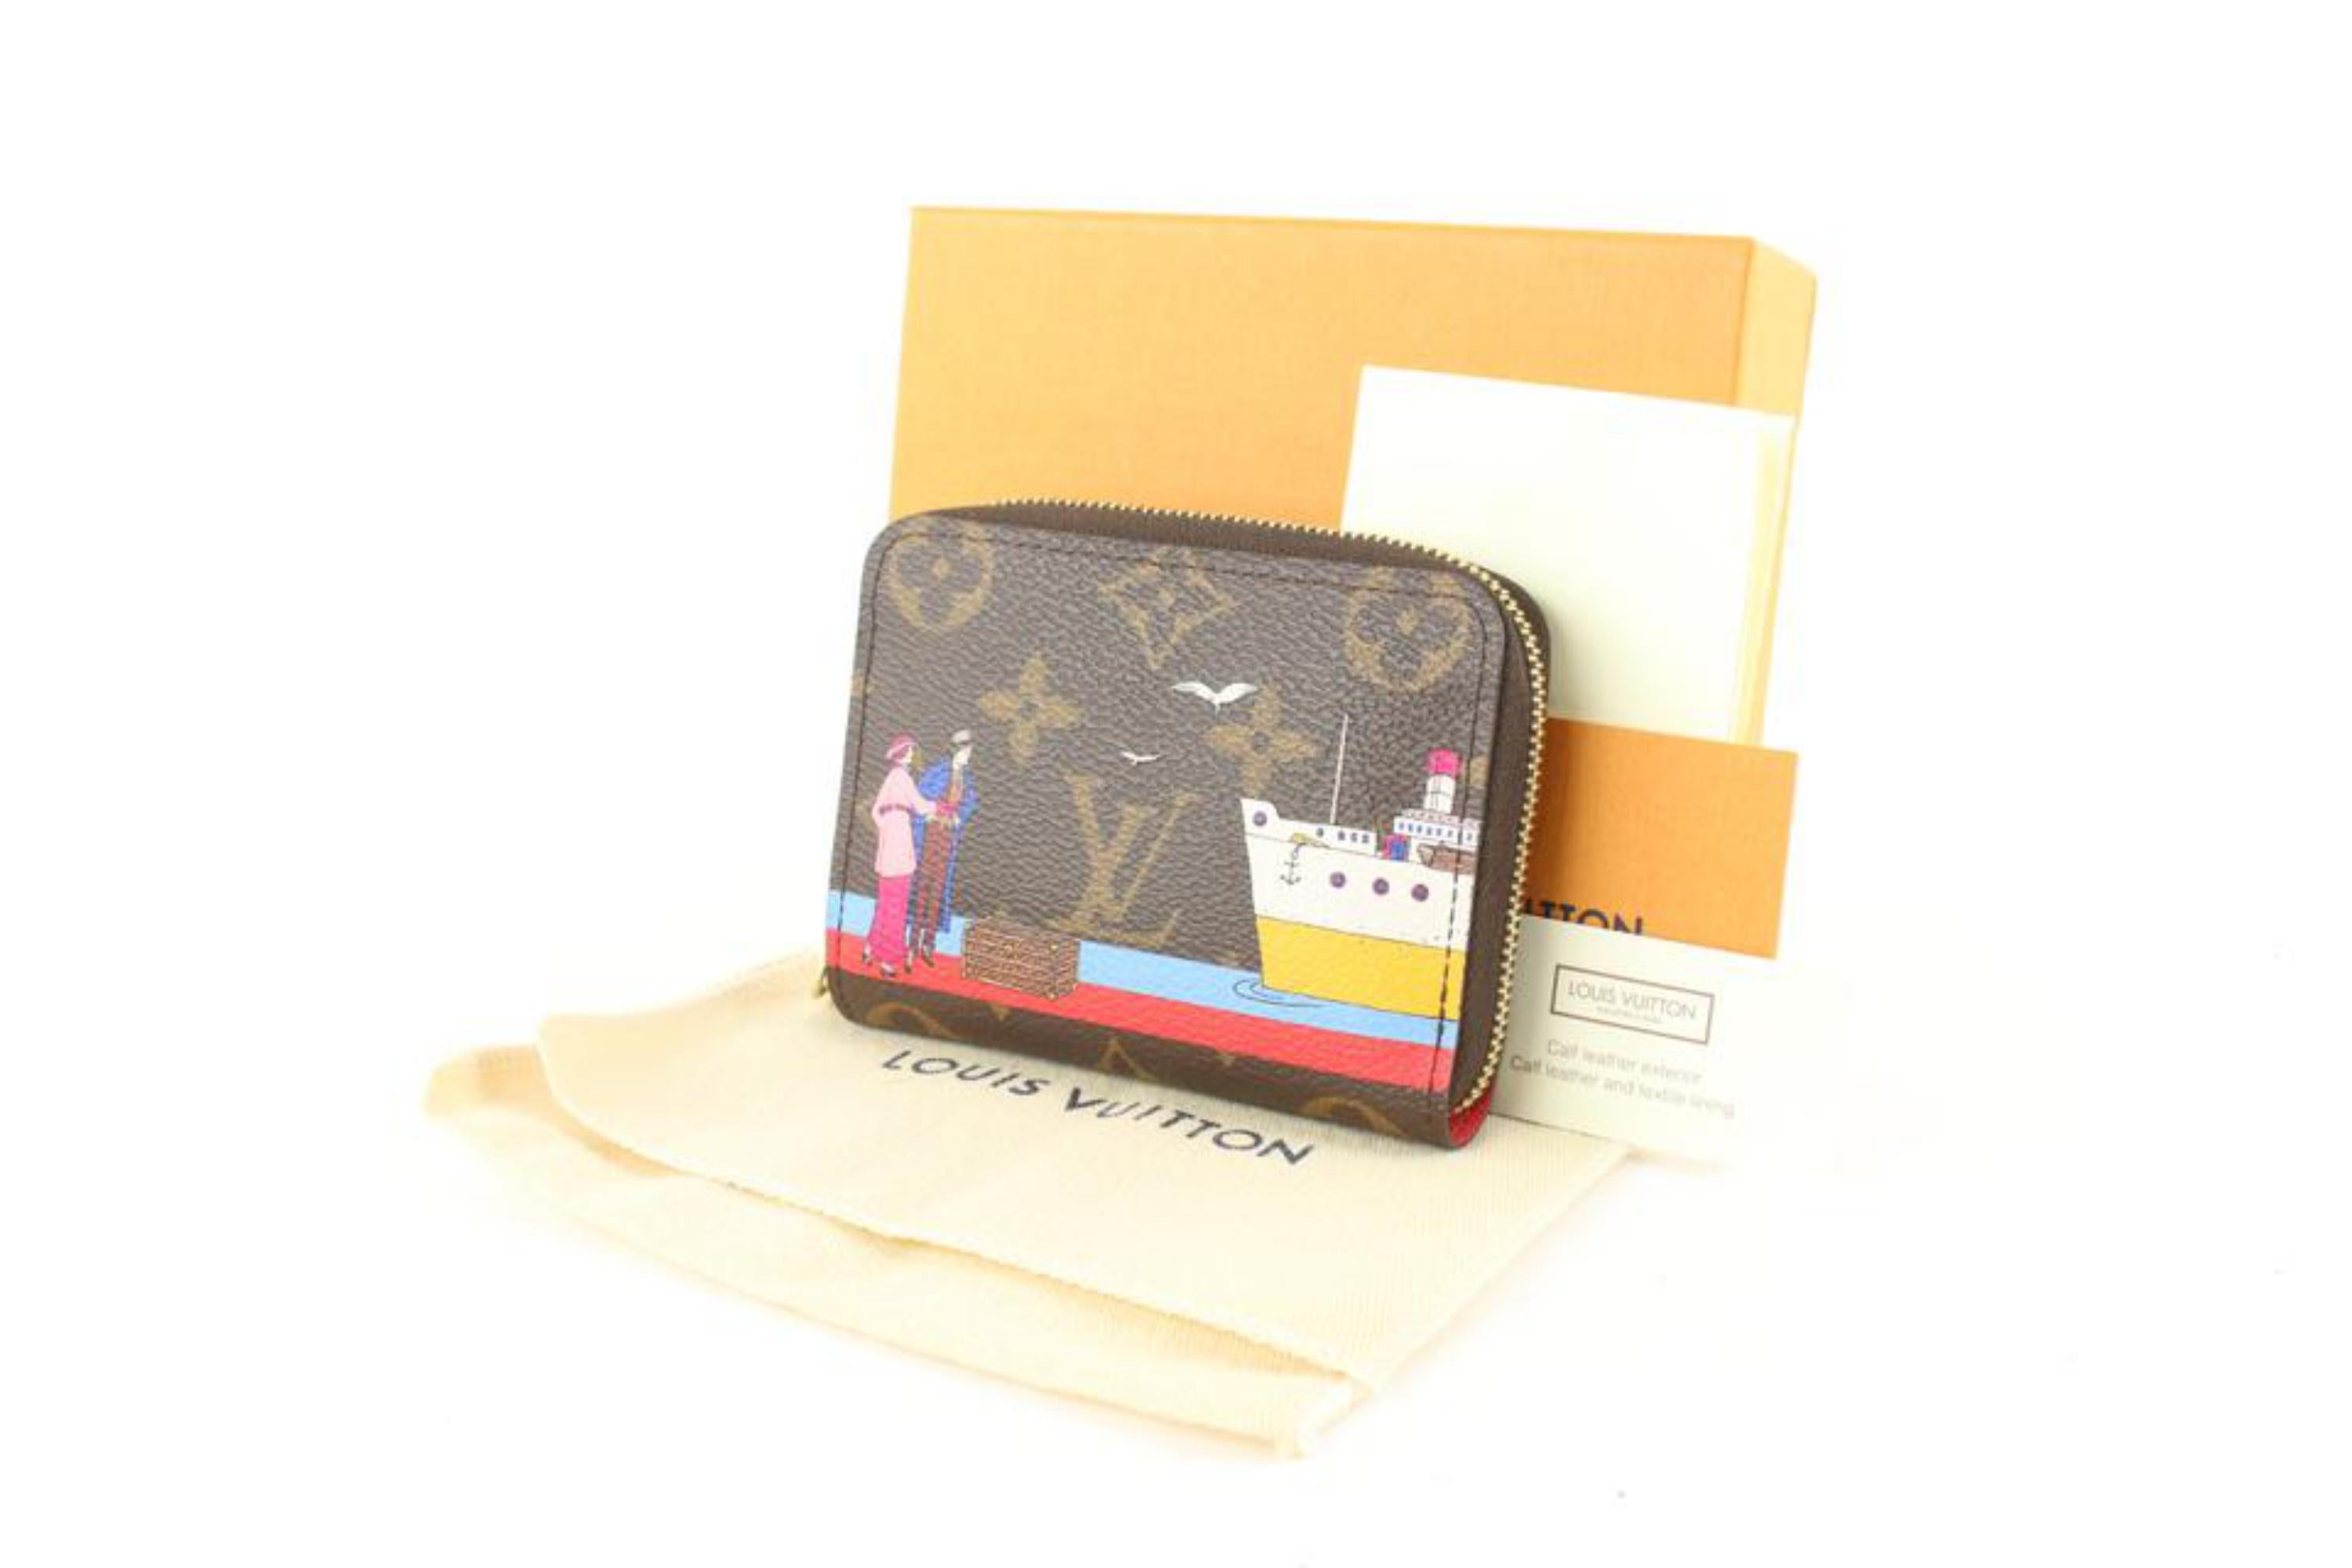 Louis Vuitton LV Atlantic Cruise Compact Zippy Wallet Zip Around 1222lv35
Date Code/Serial Number: TS2136
Made In: France
Measurements: Length:  3.2